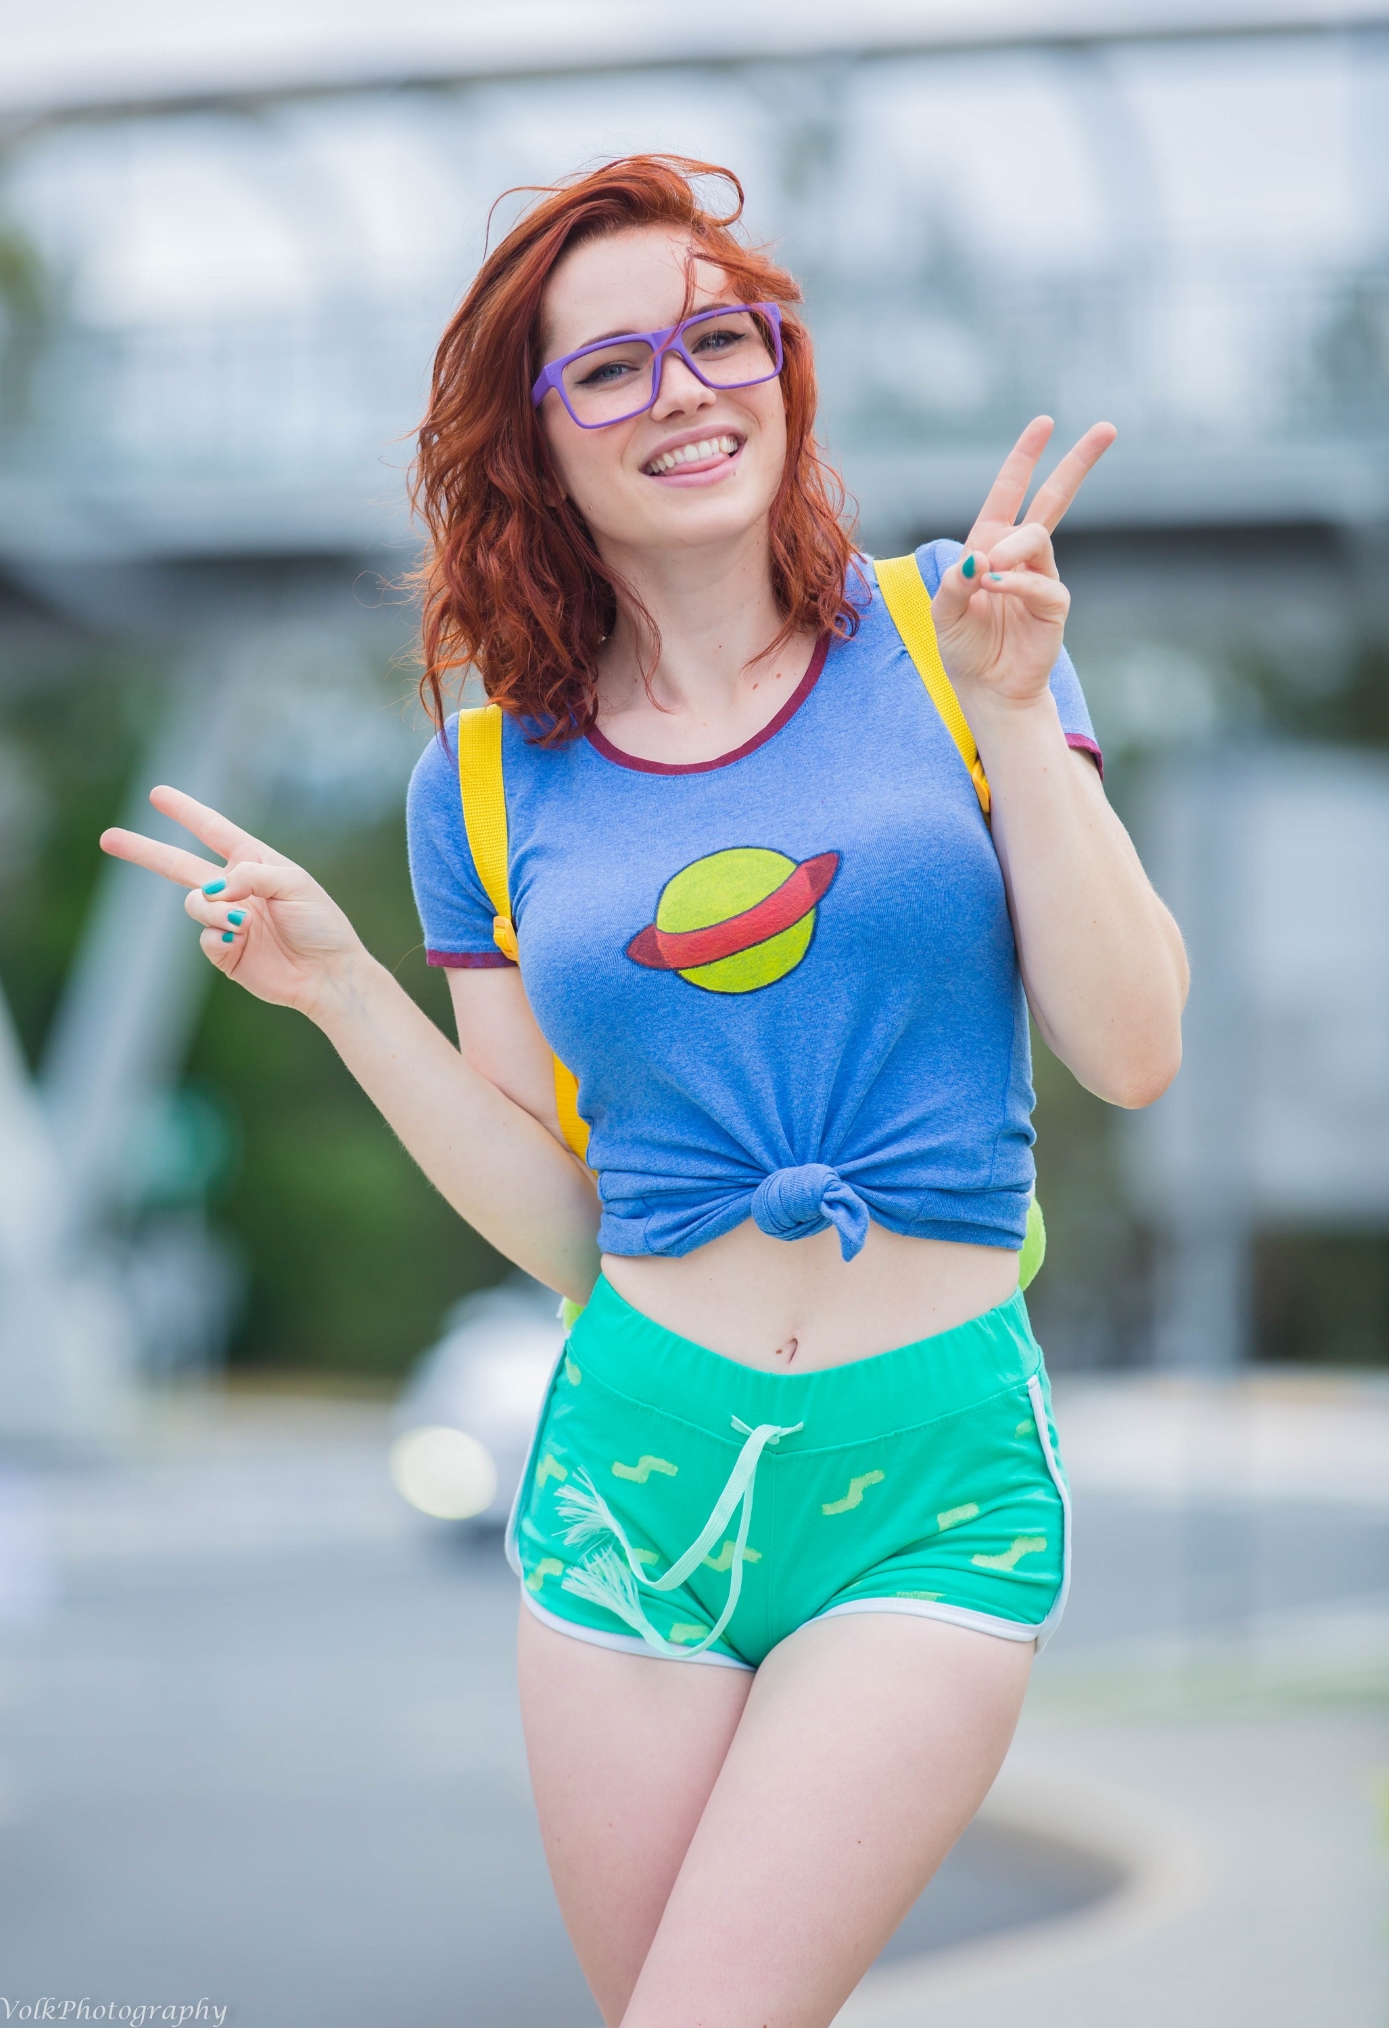 Nichameleon Women Model Redhead Fake Glasses Cosplay T Shirt Looking At Viewer Smiling Painted Nails 1389x2028